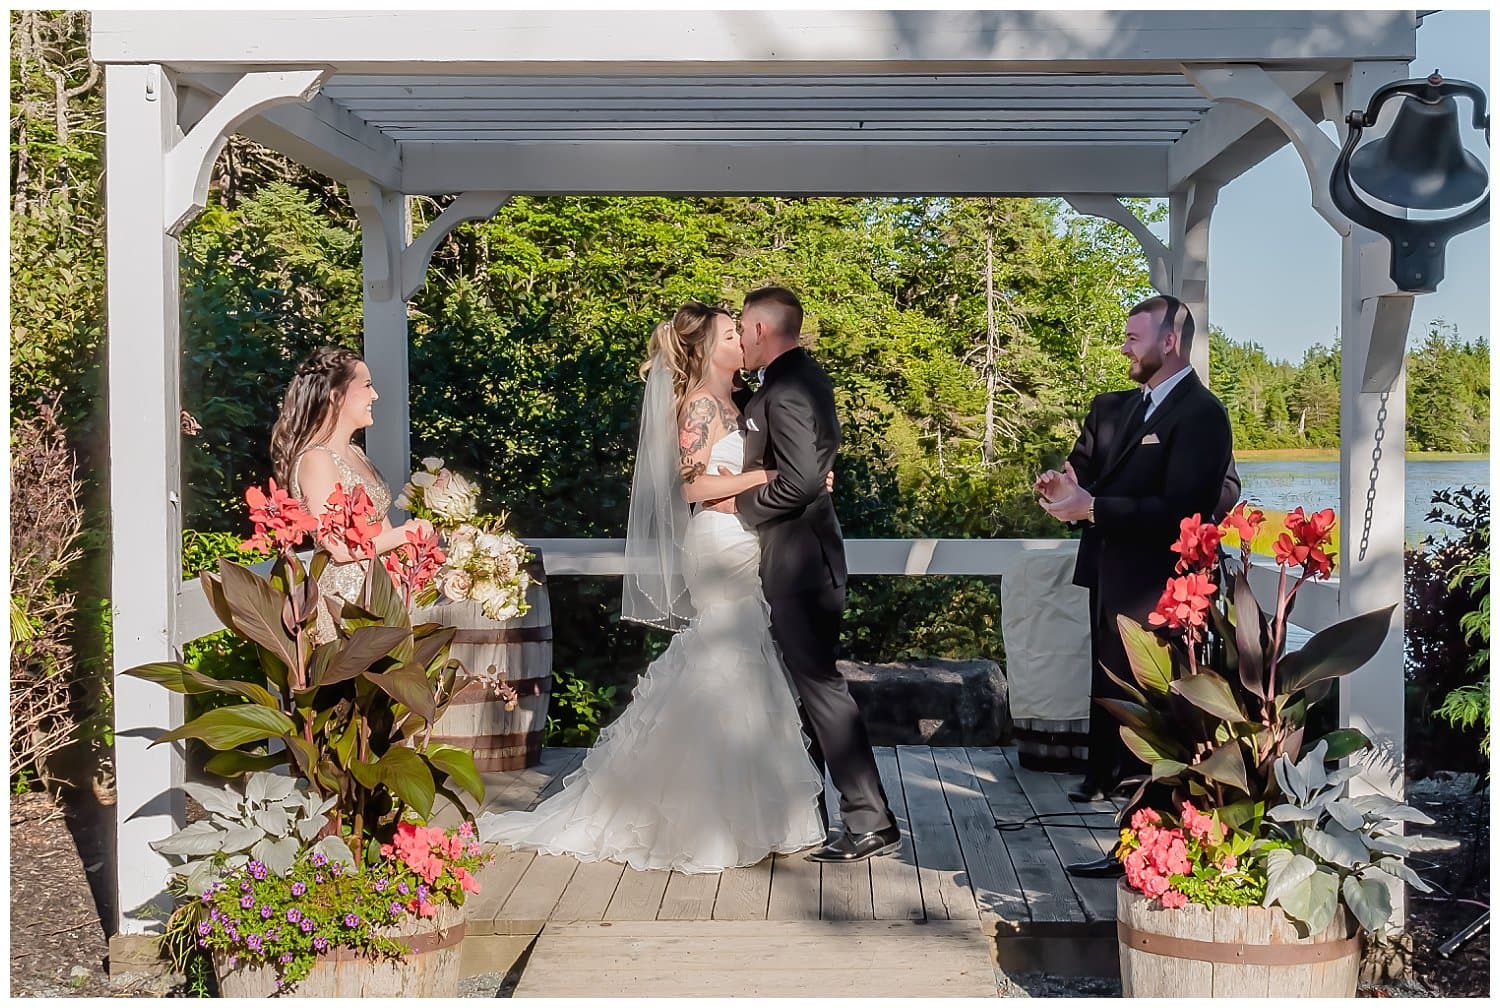 They share their first kiss during the wedding ceremony at Hatfield Farm in Halifax.